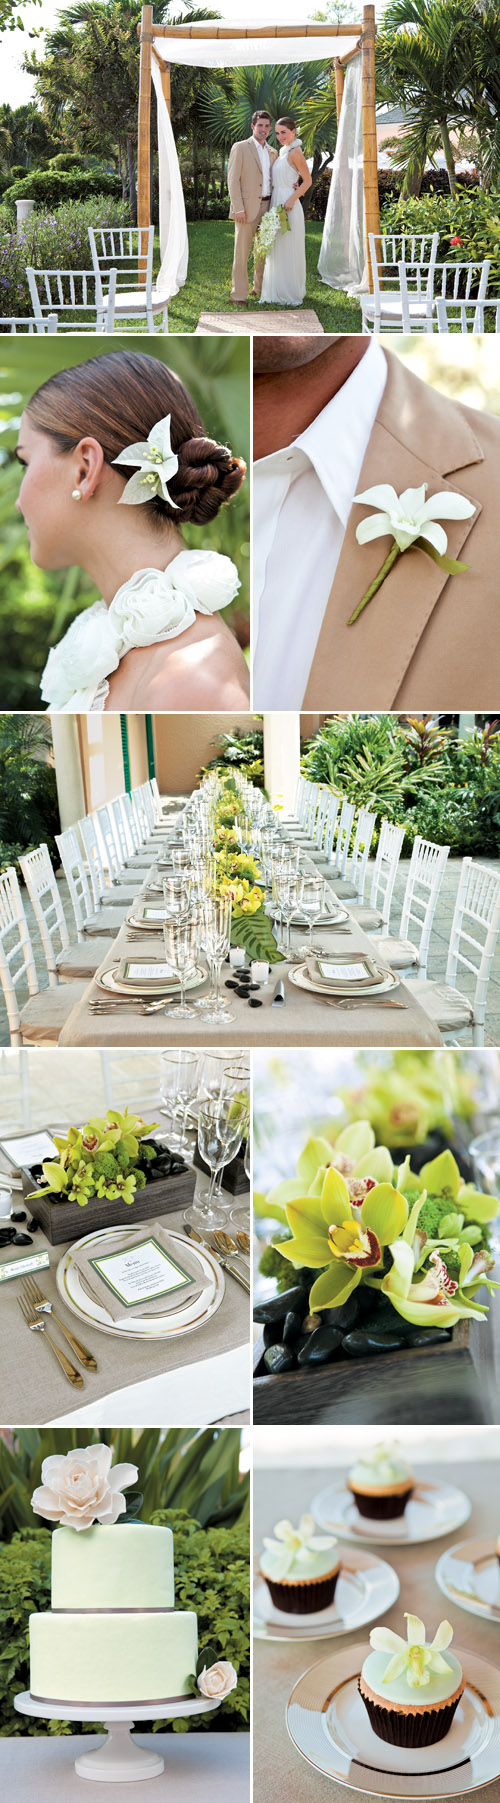 Chic and Natural destination wedding theme - Beaches Resort Turks and Caicos with destination wedding packages from Martha Stewart Weddings